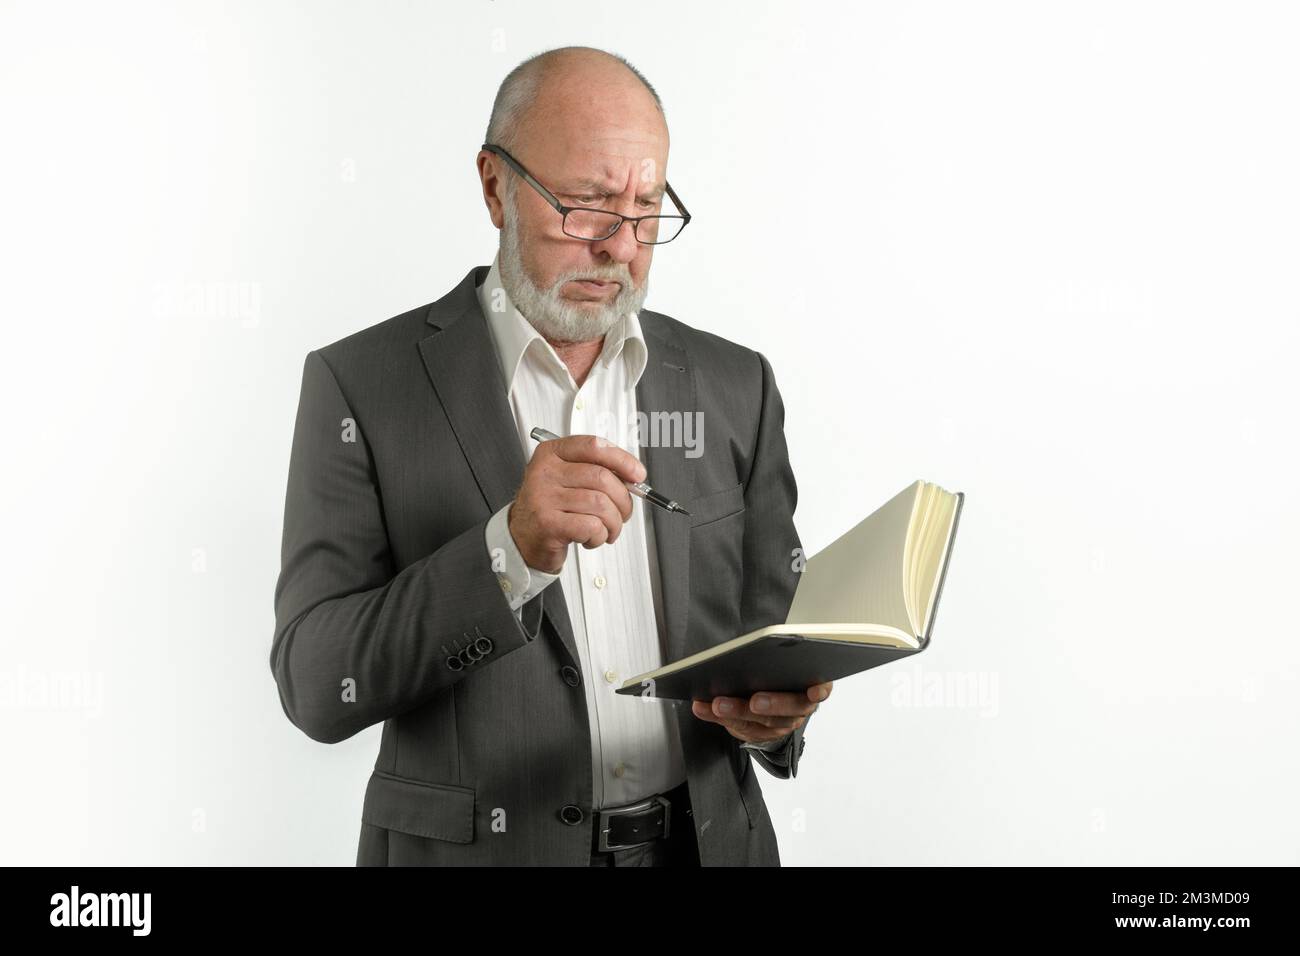 An elderly man in a suit with a notebook and a pen is thinking about a task. on a white background Stock Photo